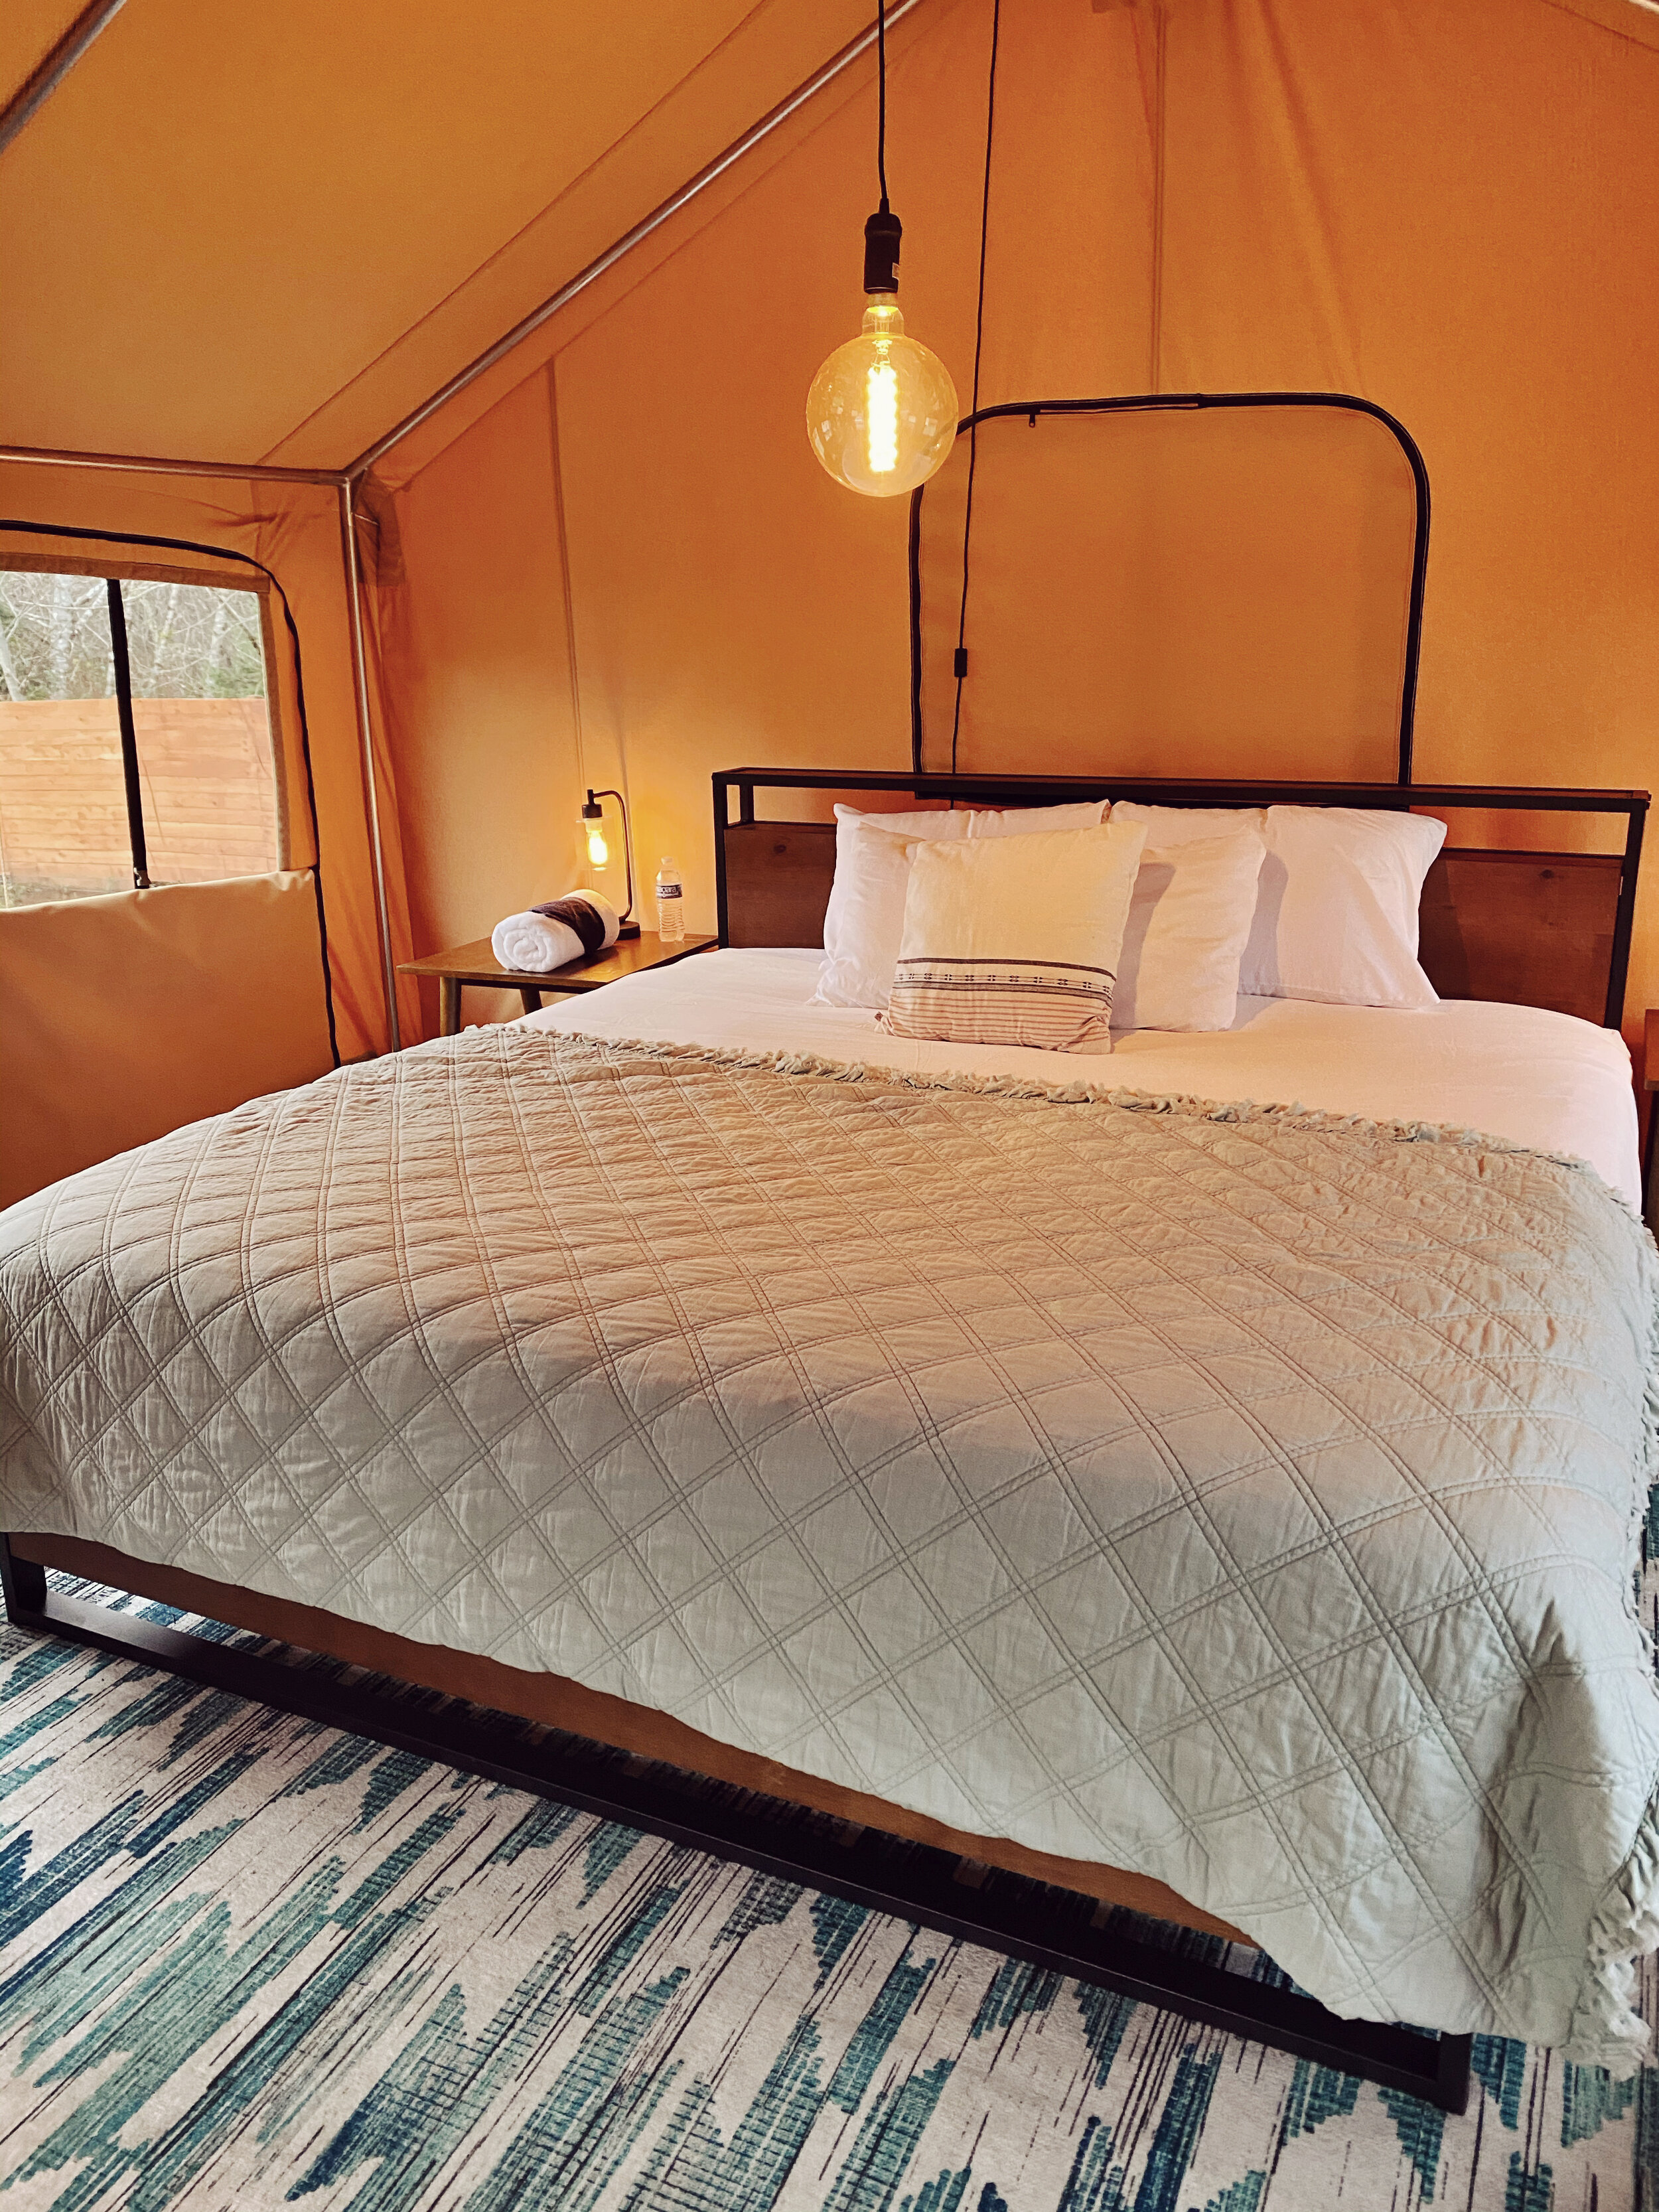 King sized bed in glamping tent at the Pacific Dunes Resort Copalis Beach Washington 